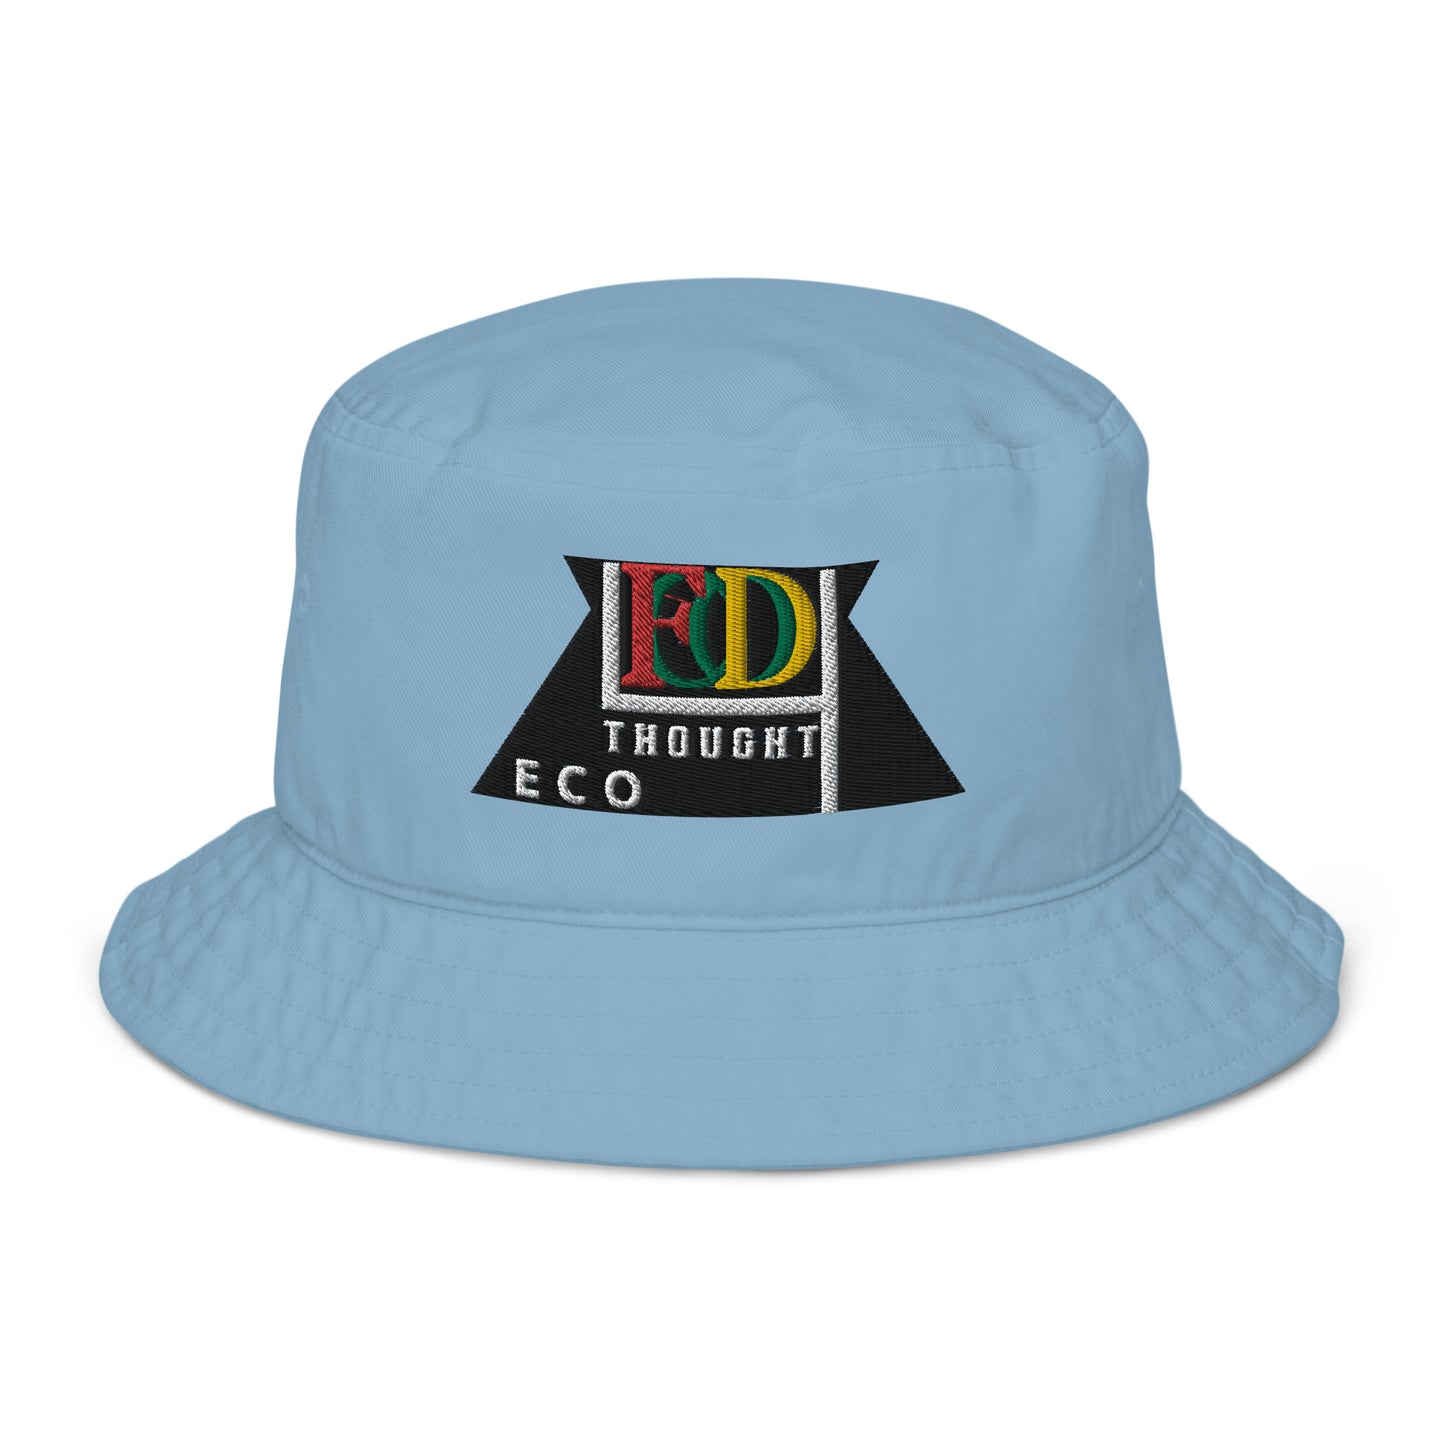 Food for thought Eco-friendly Organic bucket hat